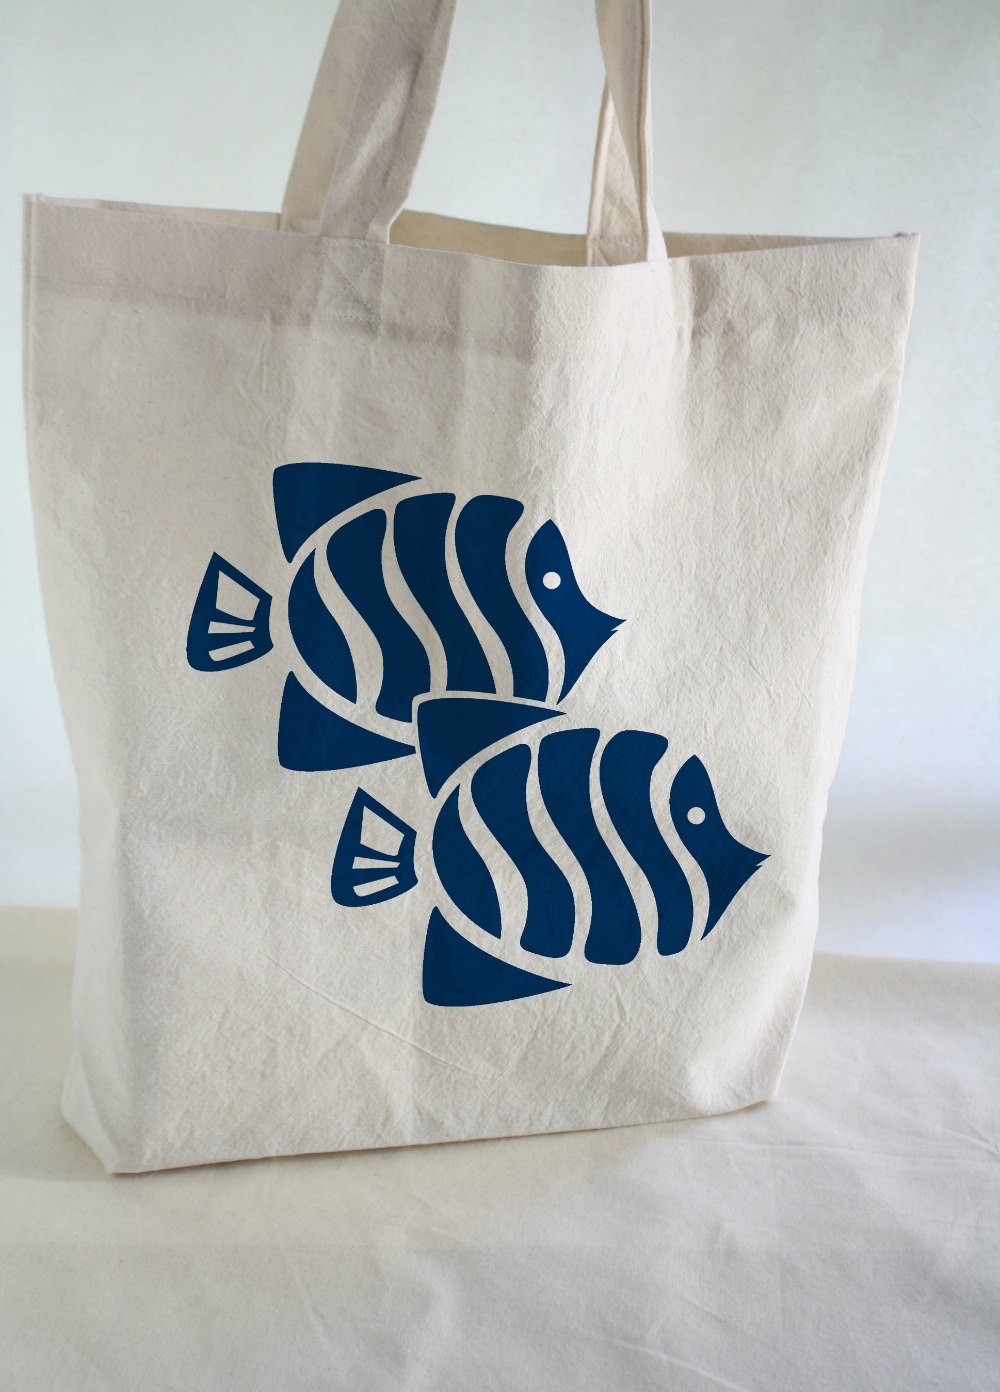 Cotton TOTE BAG - Beach Tote - Cotton Tote Bag With Hand Printed Fishes